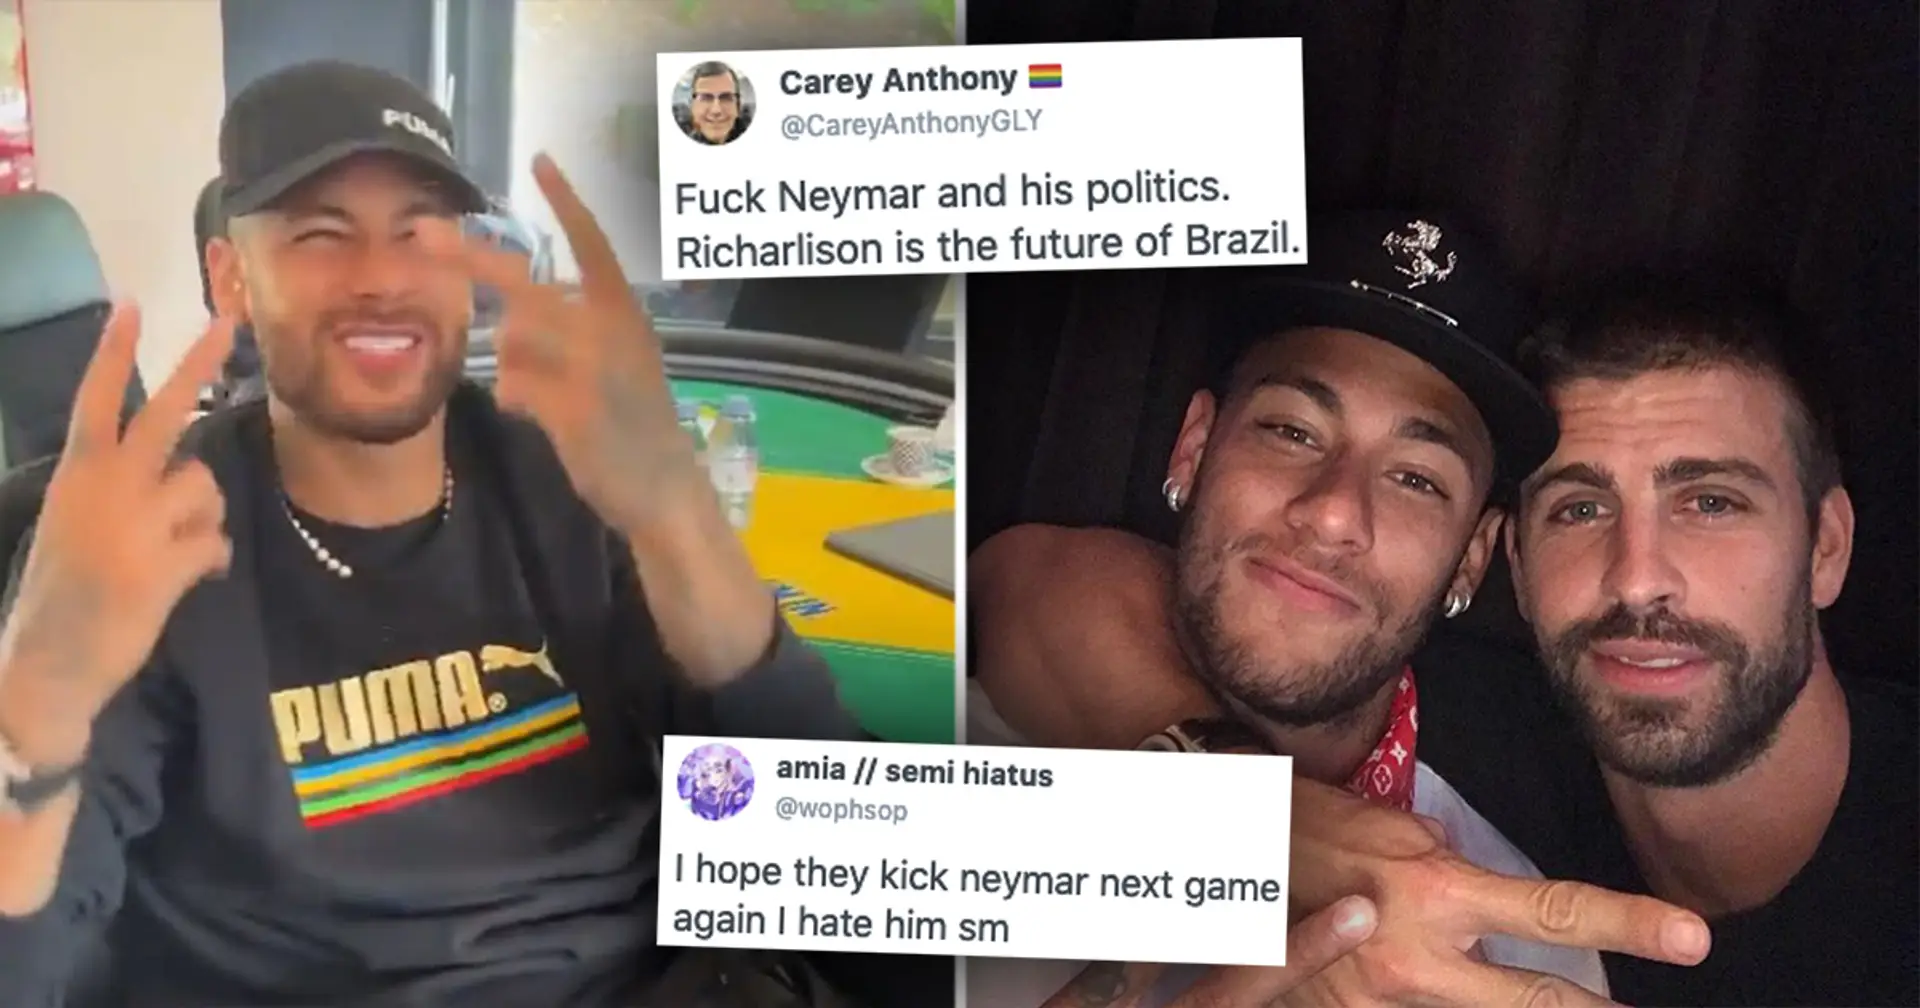 Why do Brazil fans heavily criticise Neymar? Does it have to do with Barca? Answered